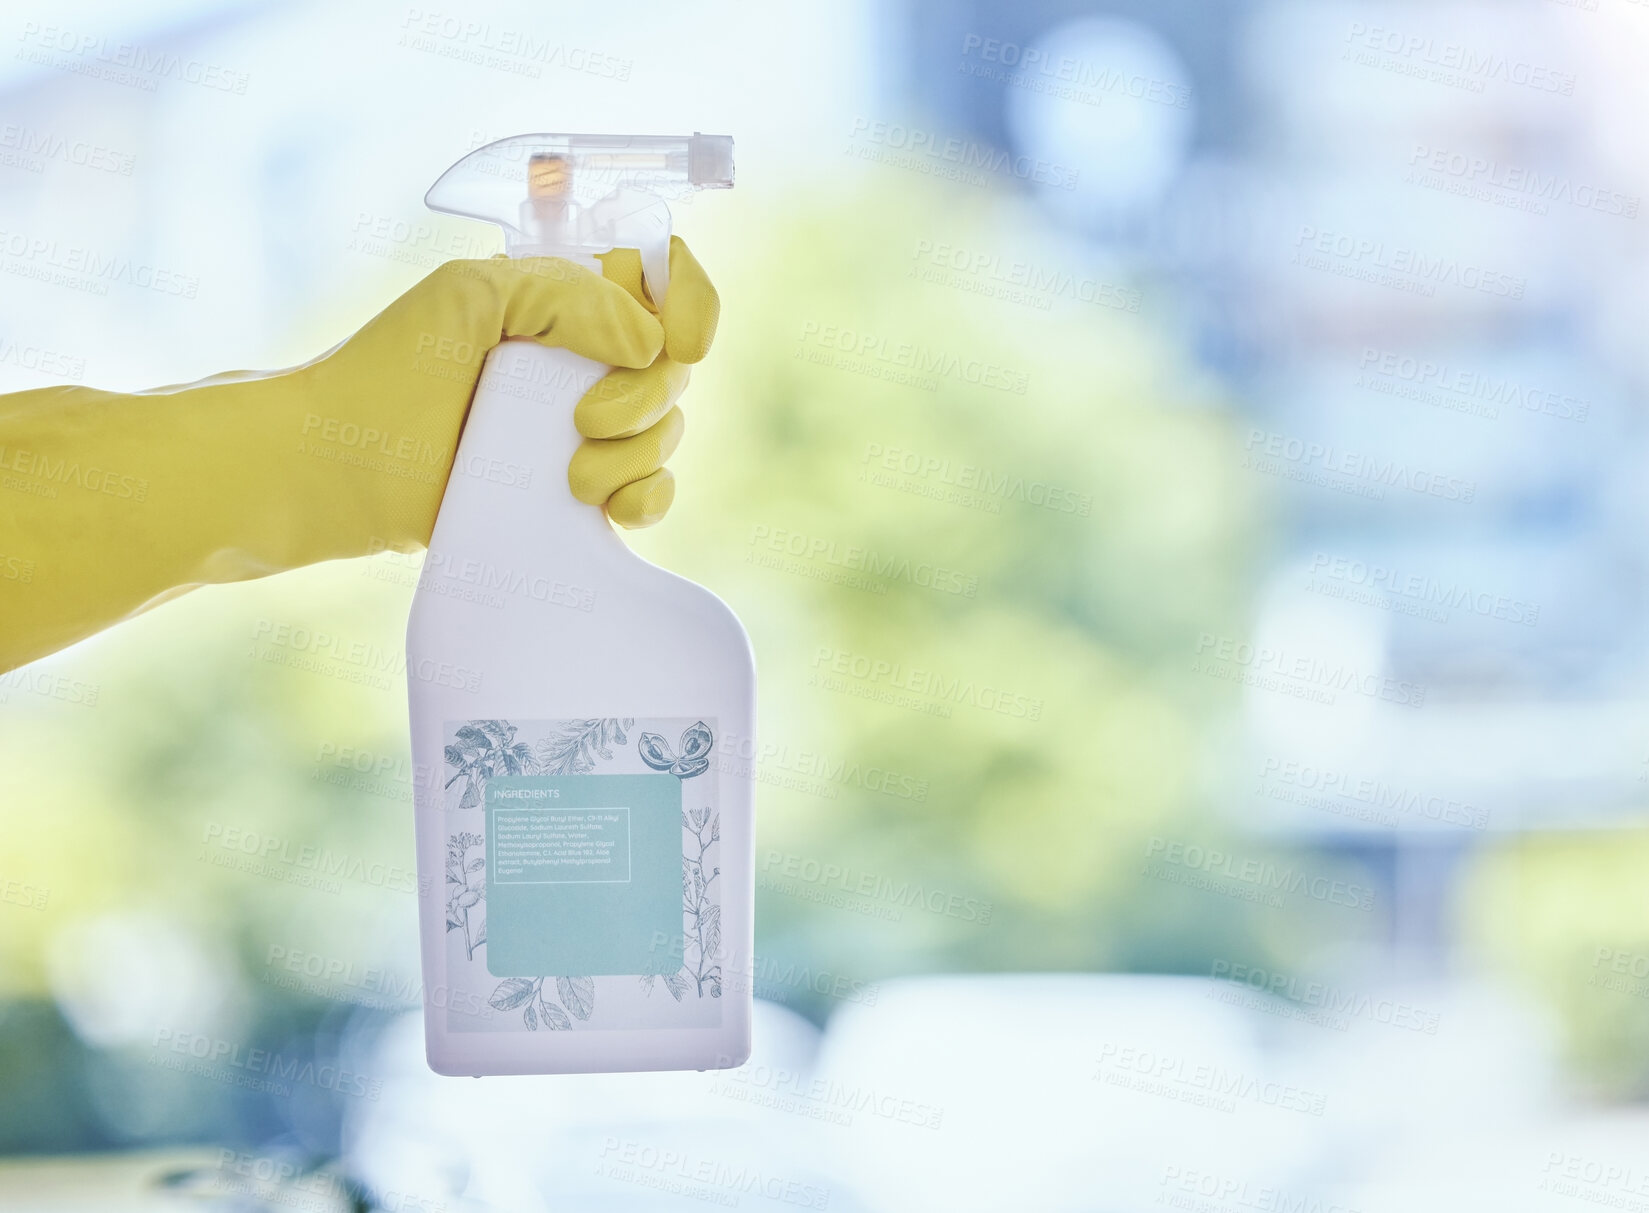 Buy stock photo Shot of an unrecognizable woman holding a cleaning product while cleaning her apartment